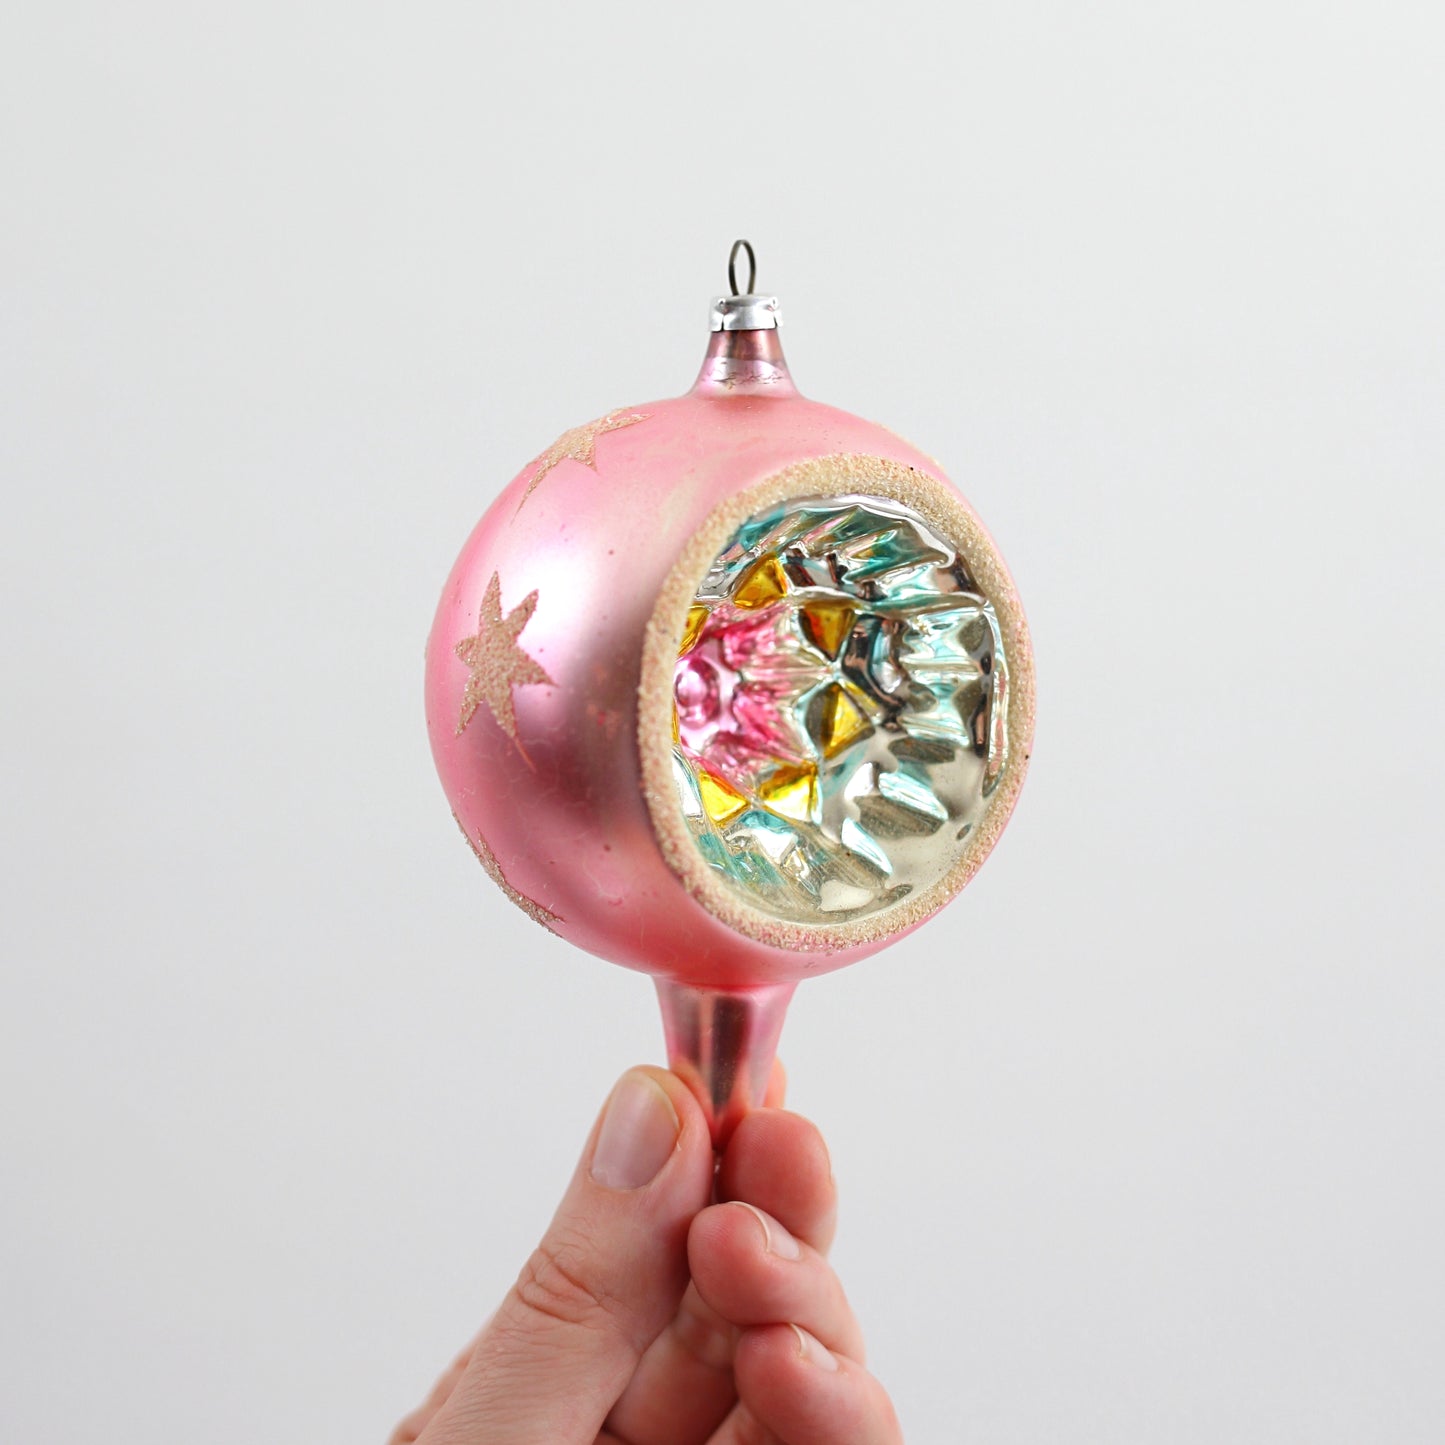 SOLD - Mid Century Pastel Indent Mercury Glass Ornaments